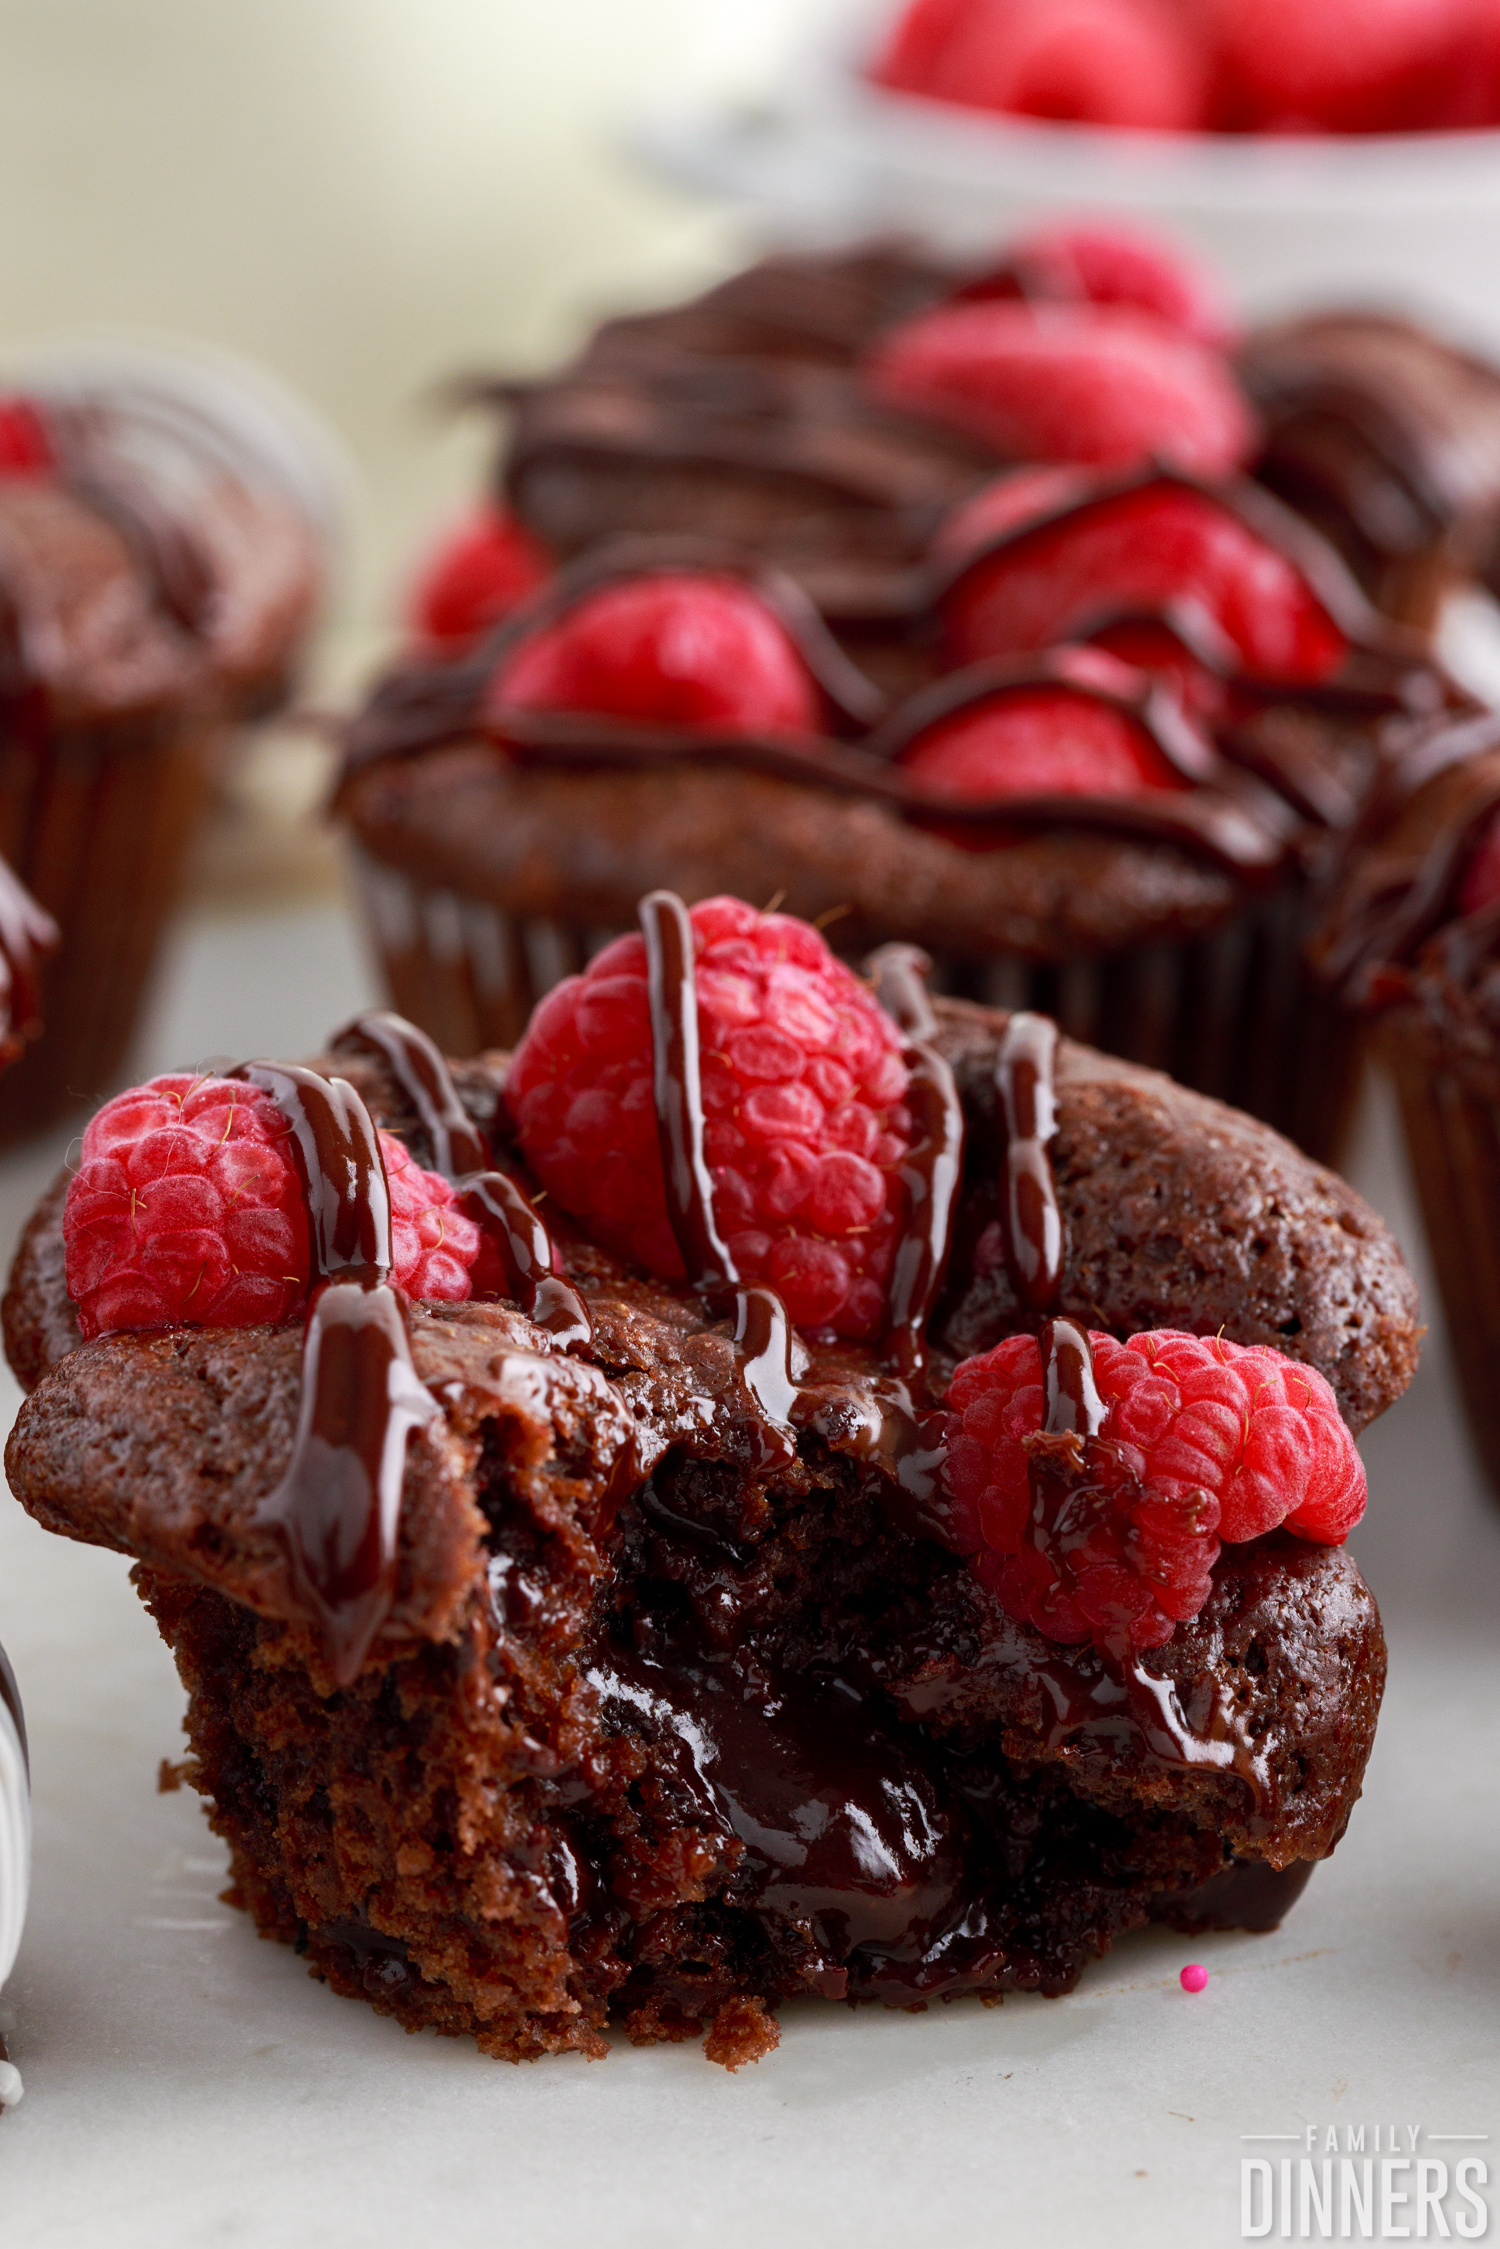 Bite out of chocolate raspberry muffin.